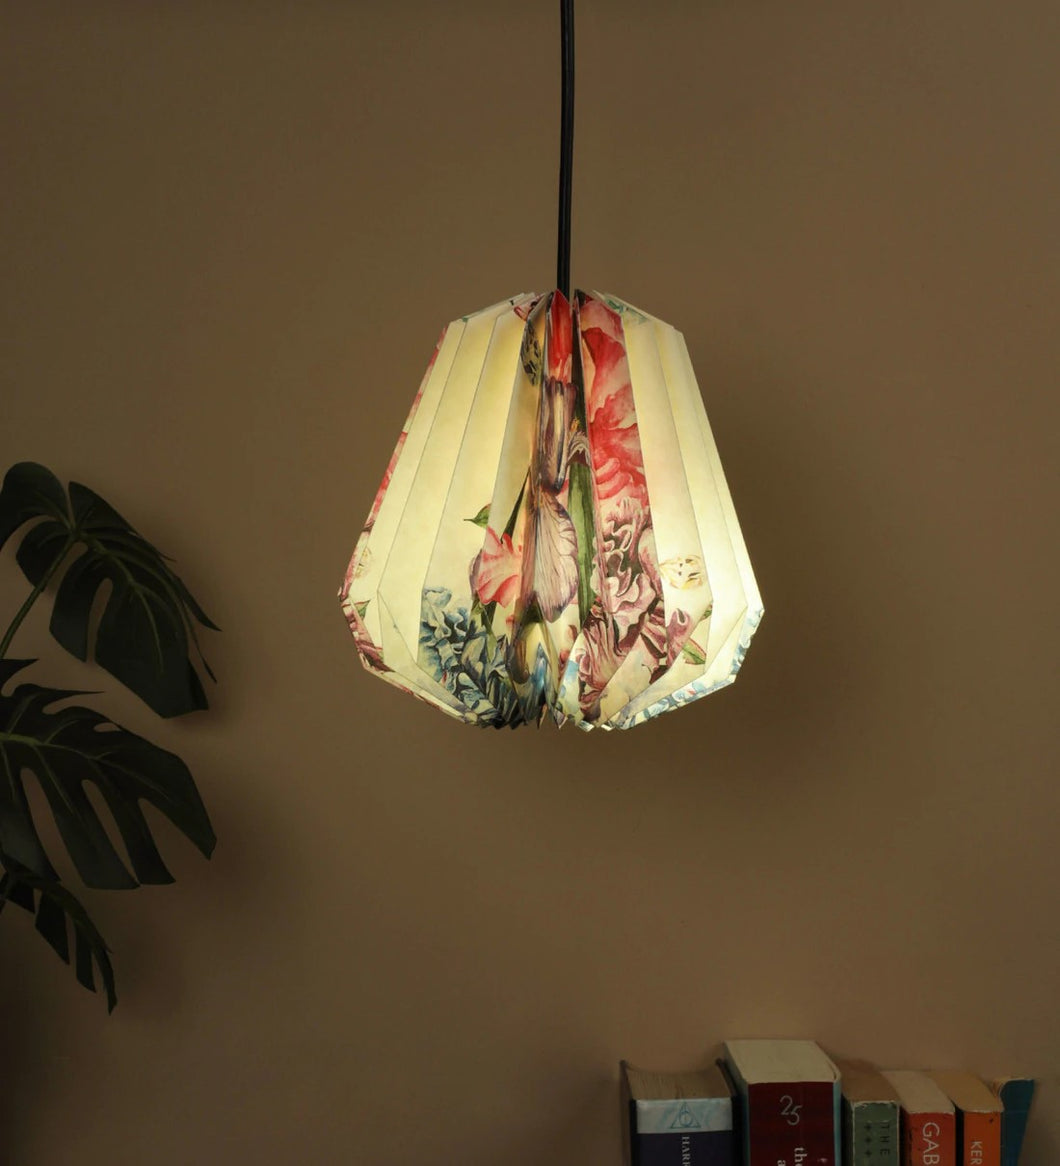 MULTICOLOR FLORAL COLLAPSIBLE HANDCRAFTED ORIGAMI HANGING LAMPSHADE